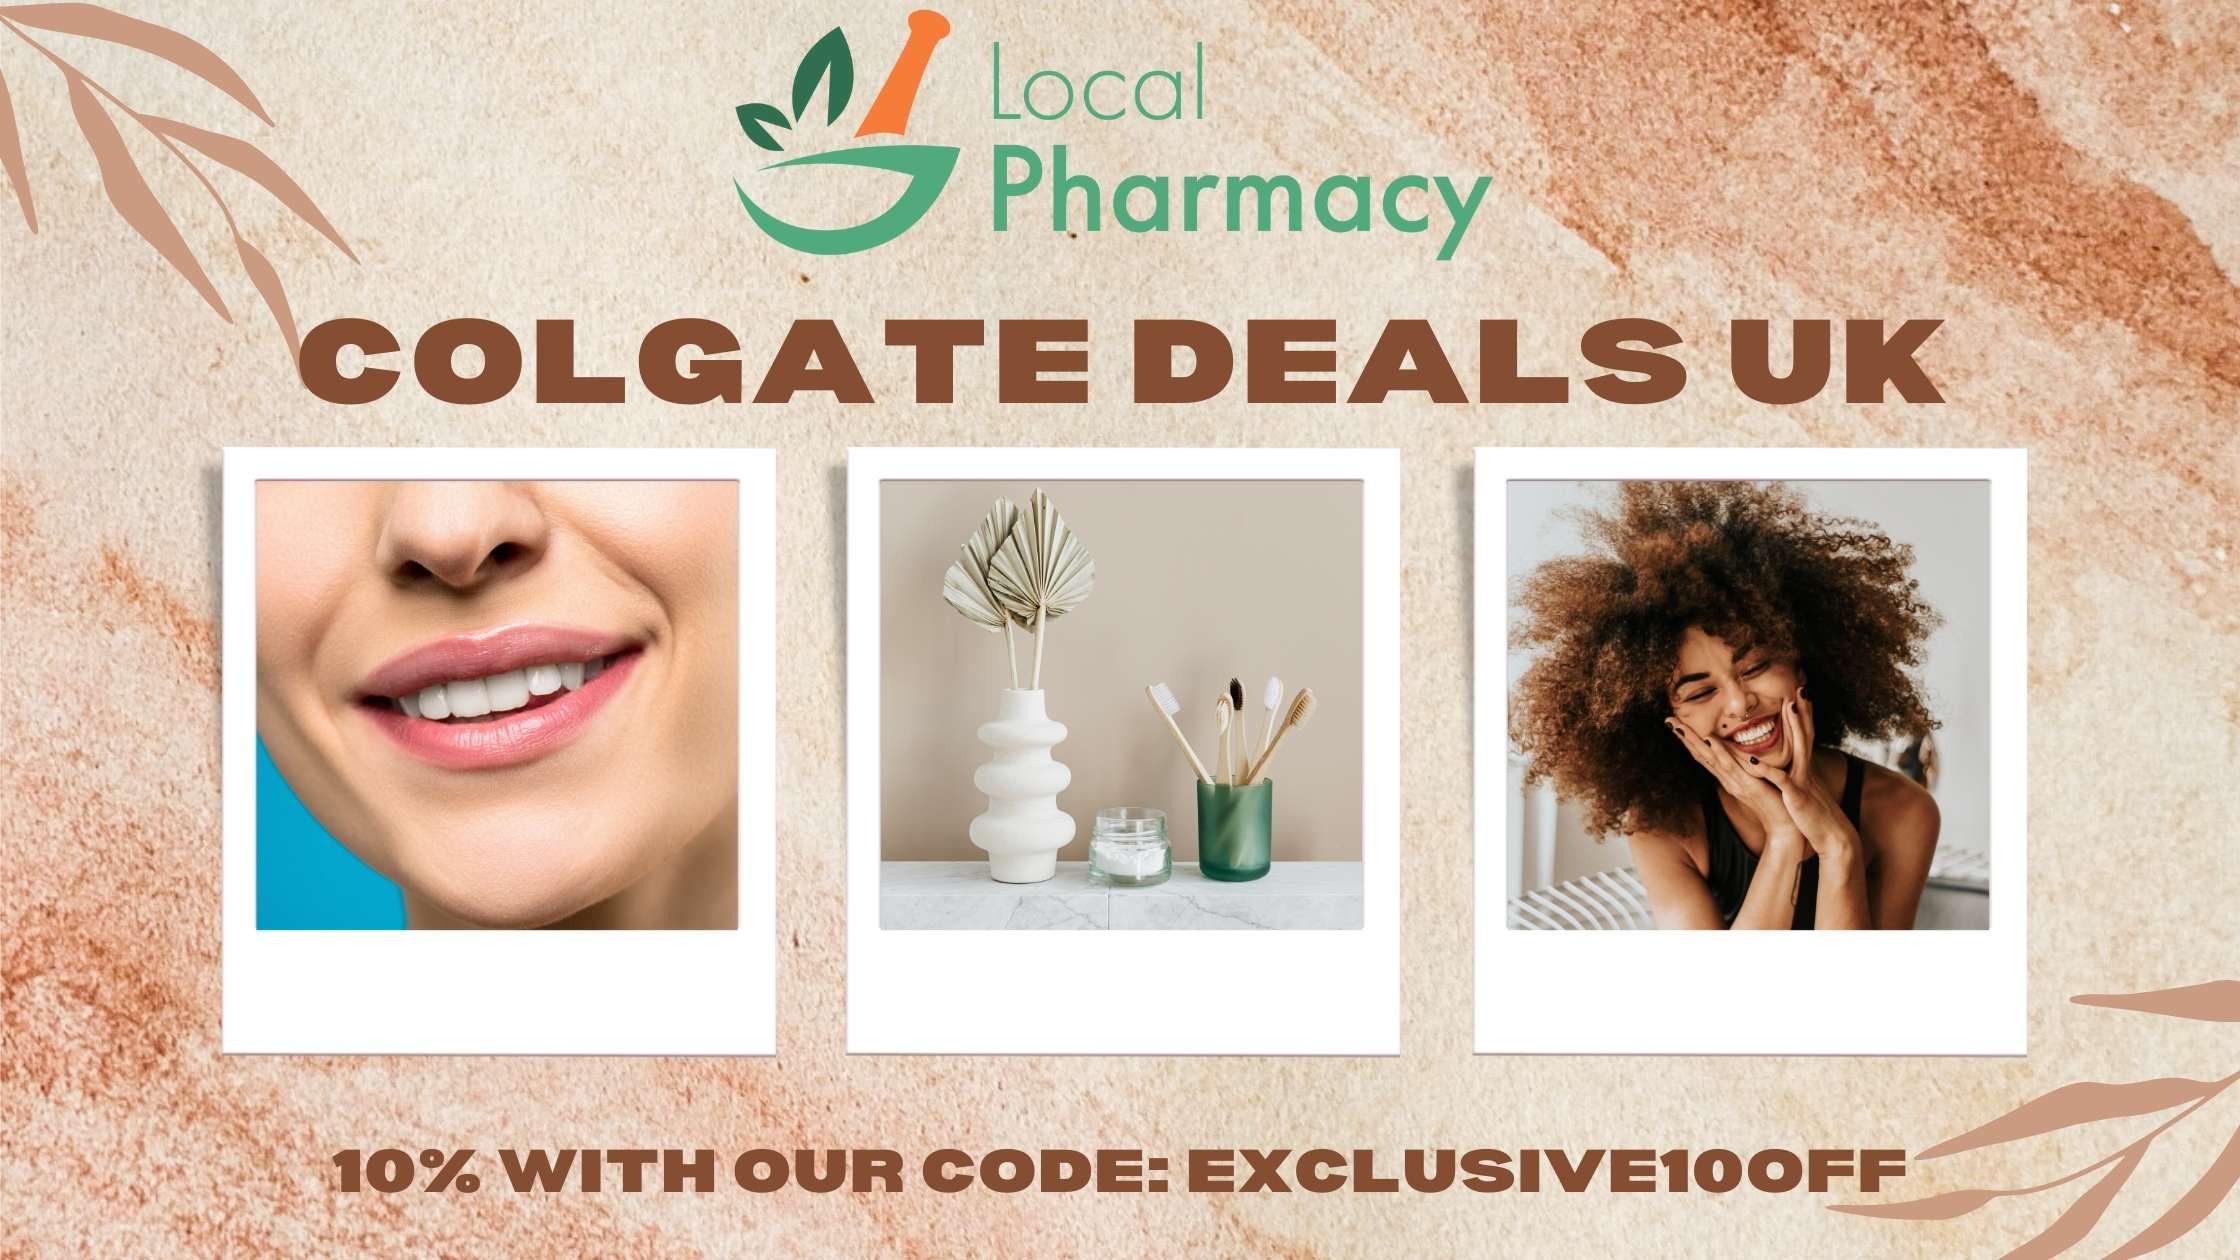 Colgate coupon code and deals uk